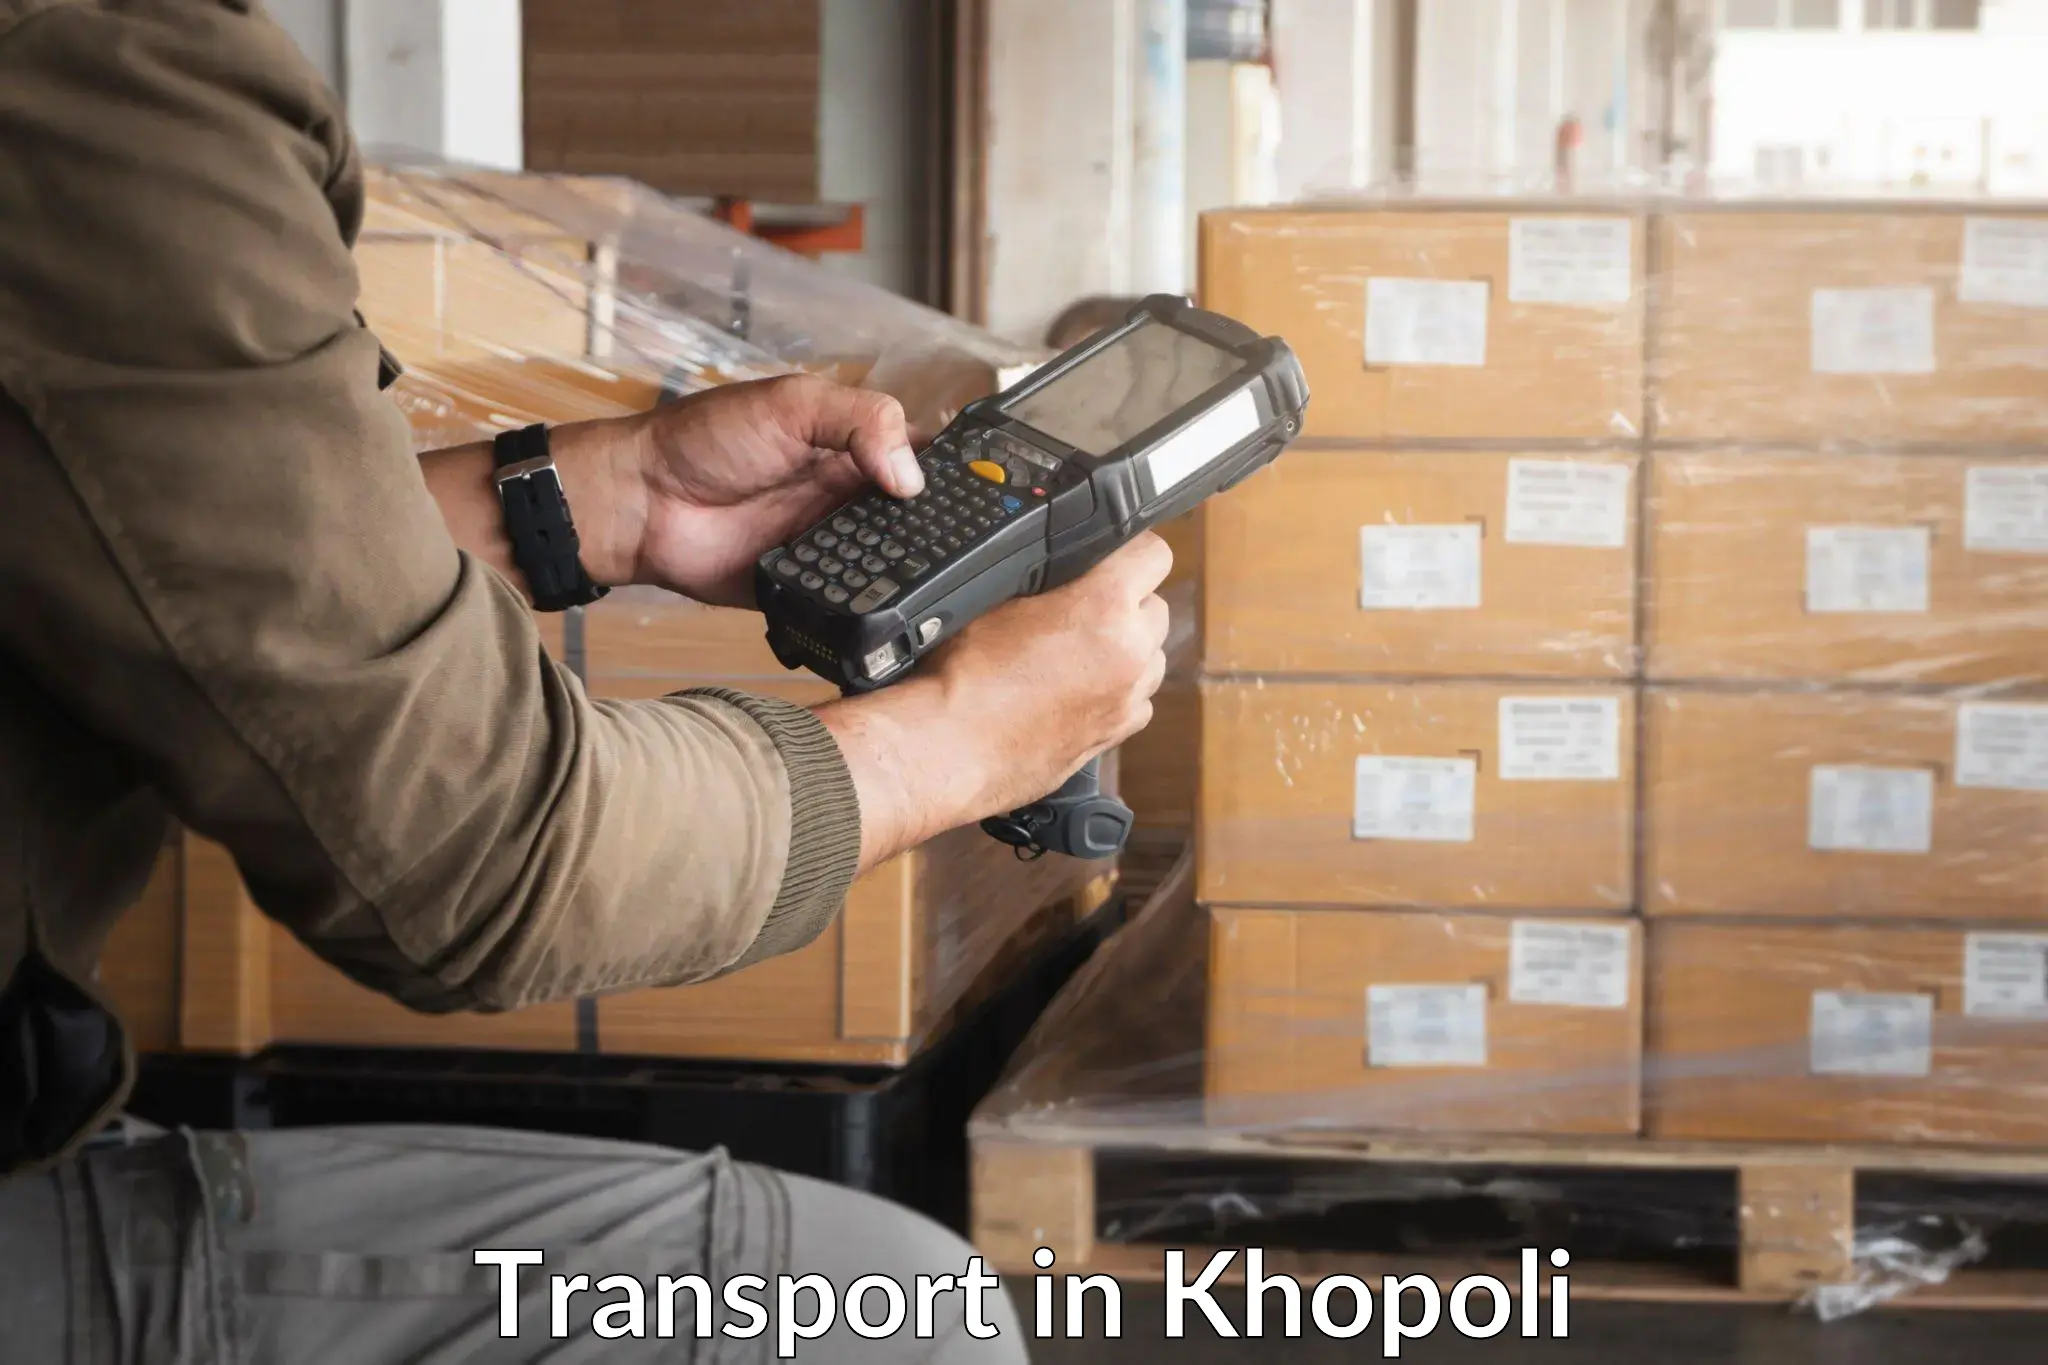 Luggage transport services in Khopoli